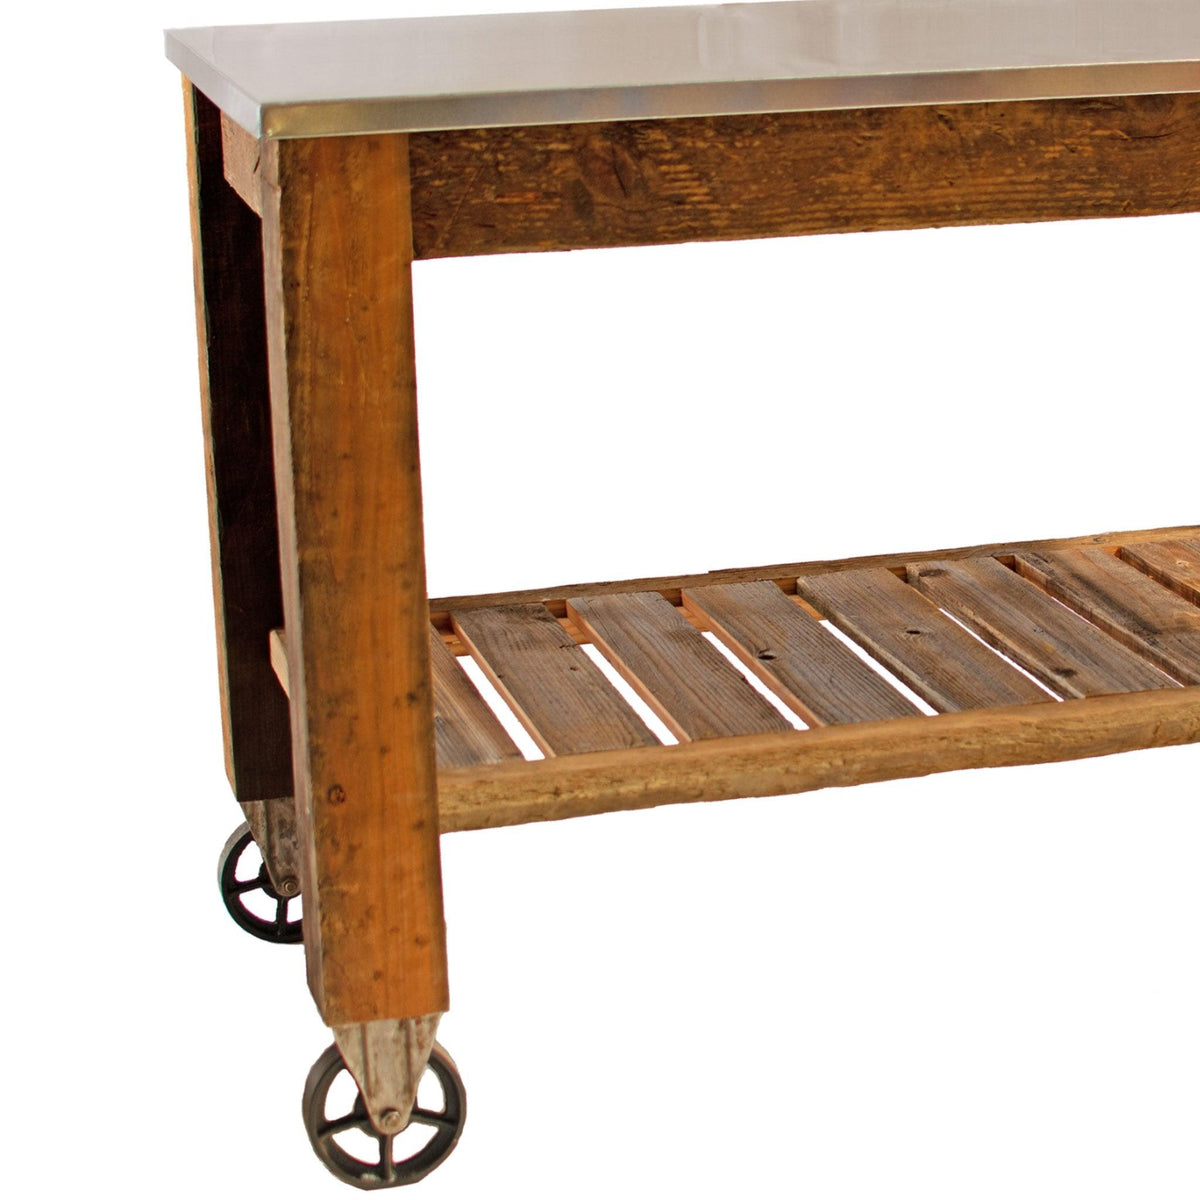 Corner photo of Lee Display's Redwood Potting Table Rolling Cart with 6in Vintage Casters without Hardware Included on sale now at leedisplay.com